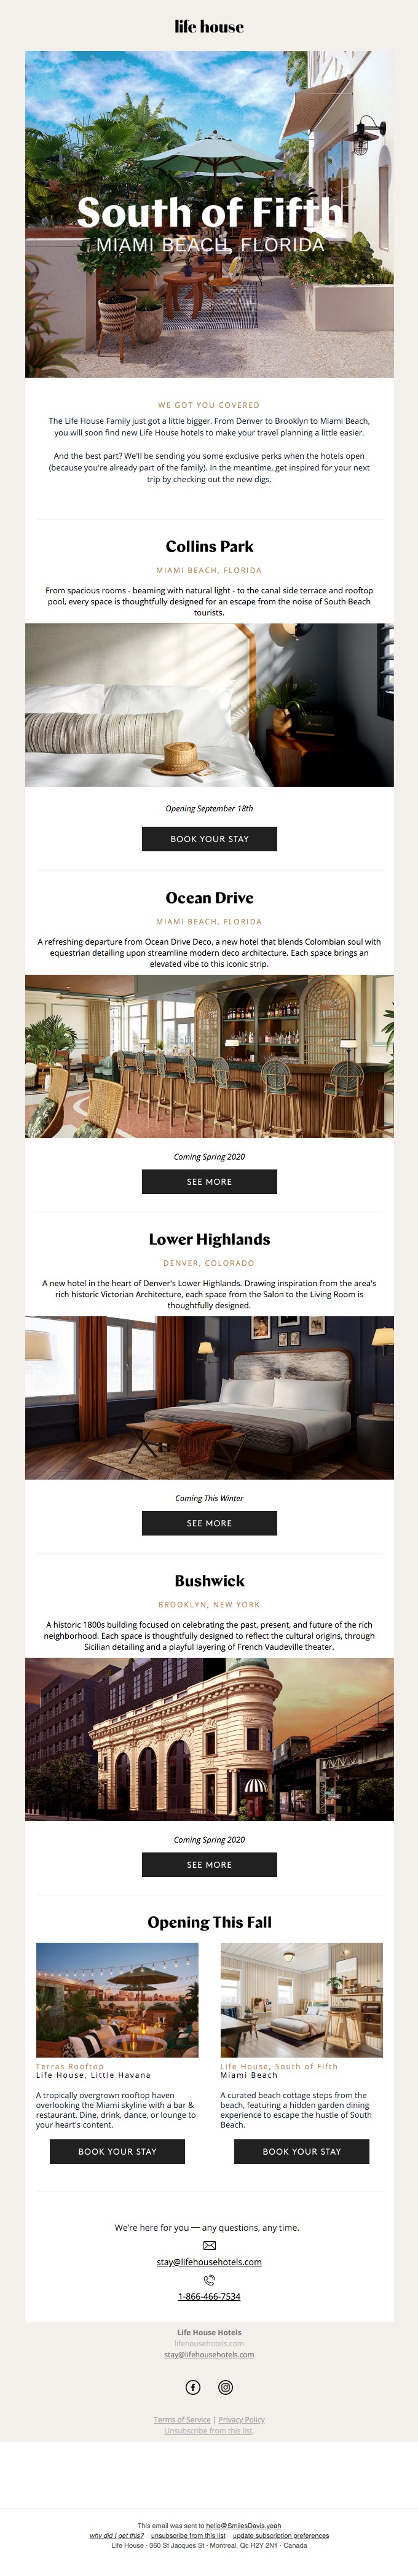  Life House Hotels includes social share buttons in newsletter